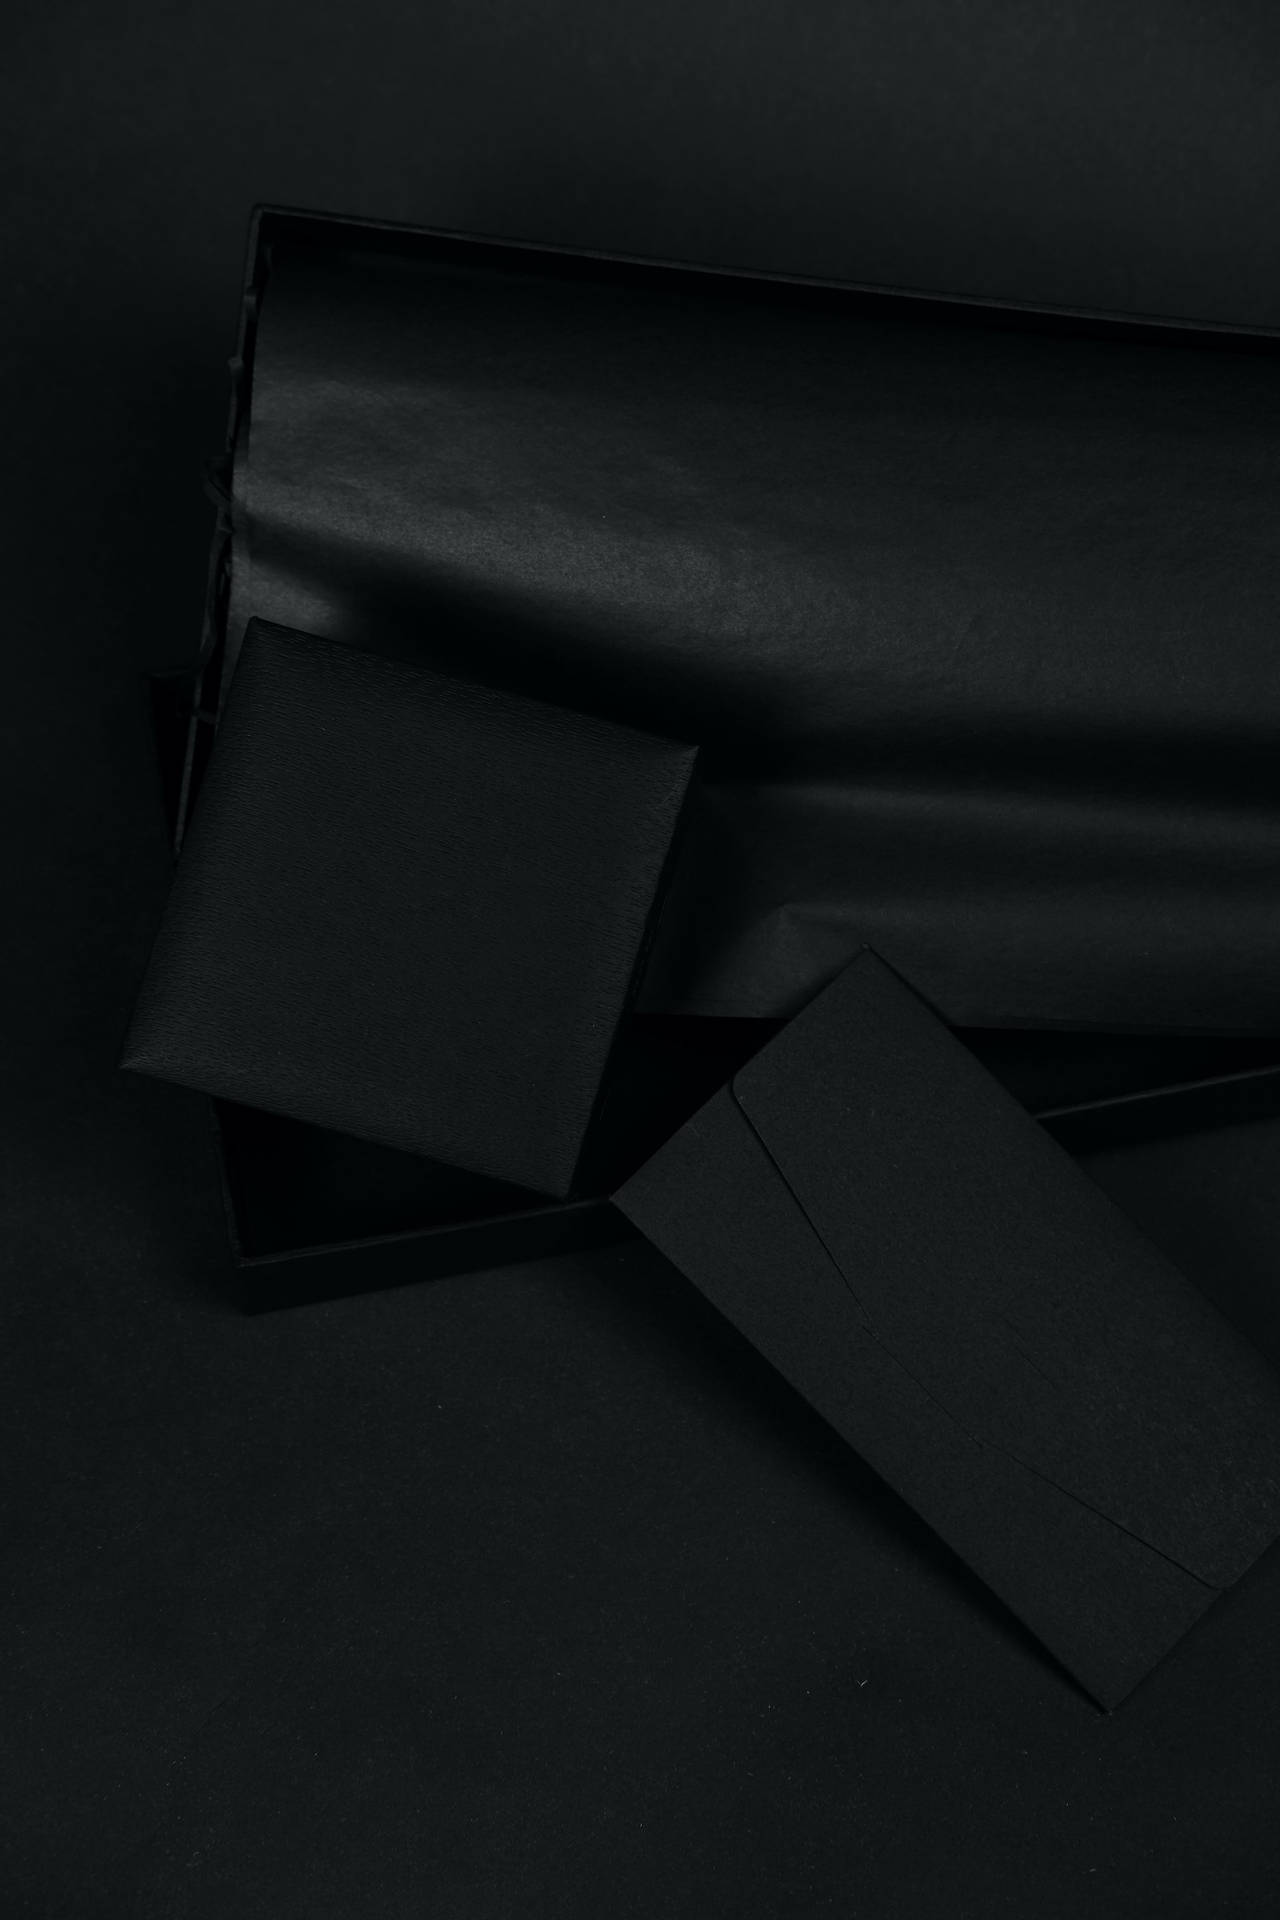 Boxes And Envelope Black Aesthetic Tumblr Iphone Wallpaper